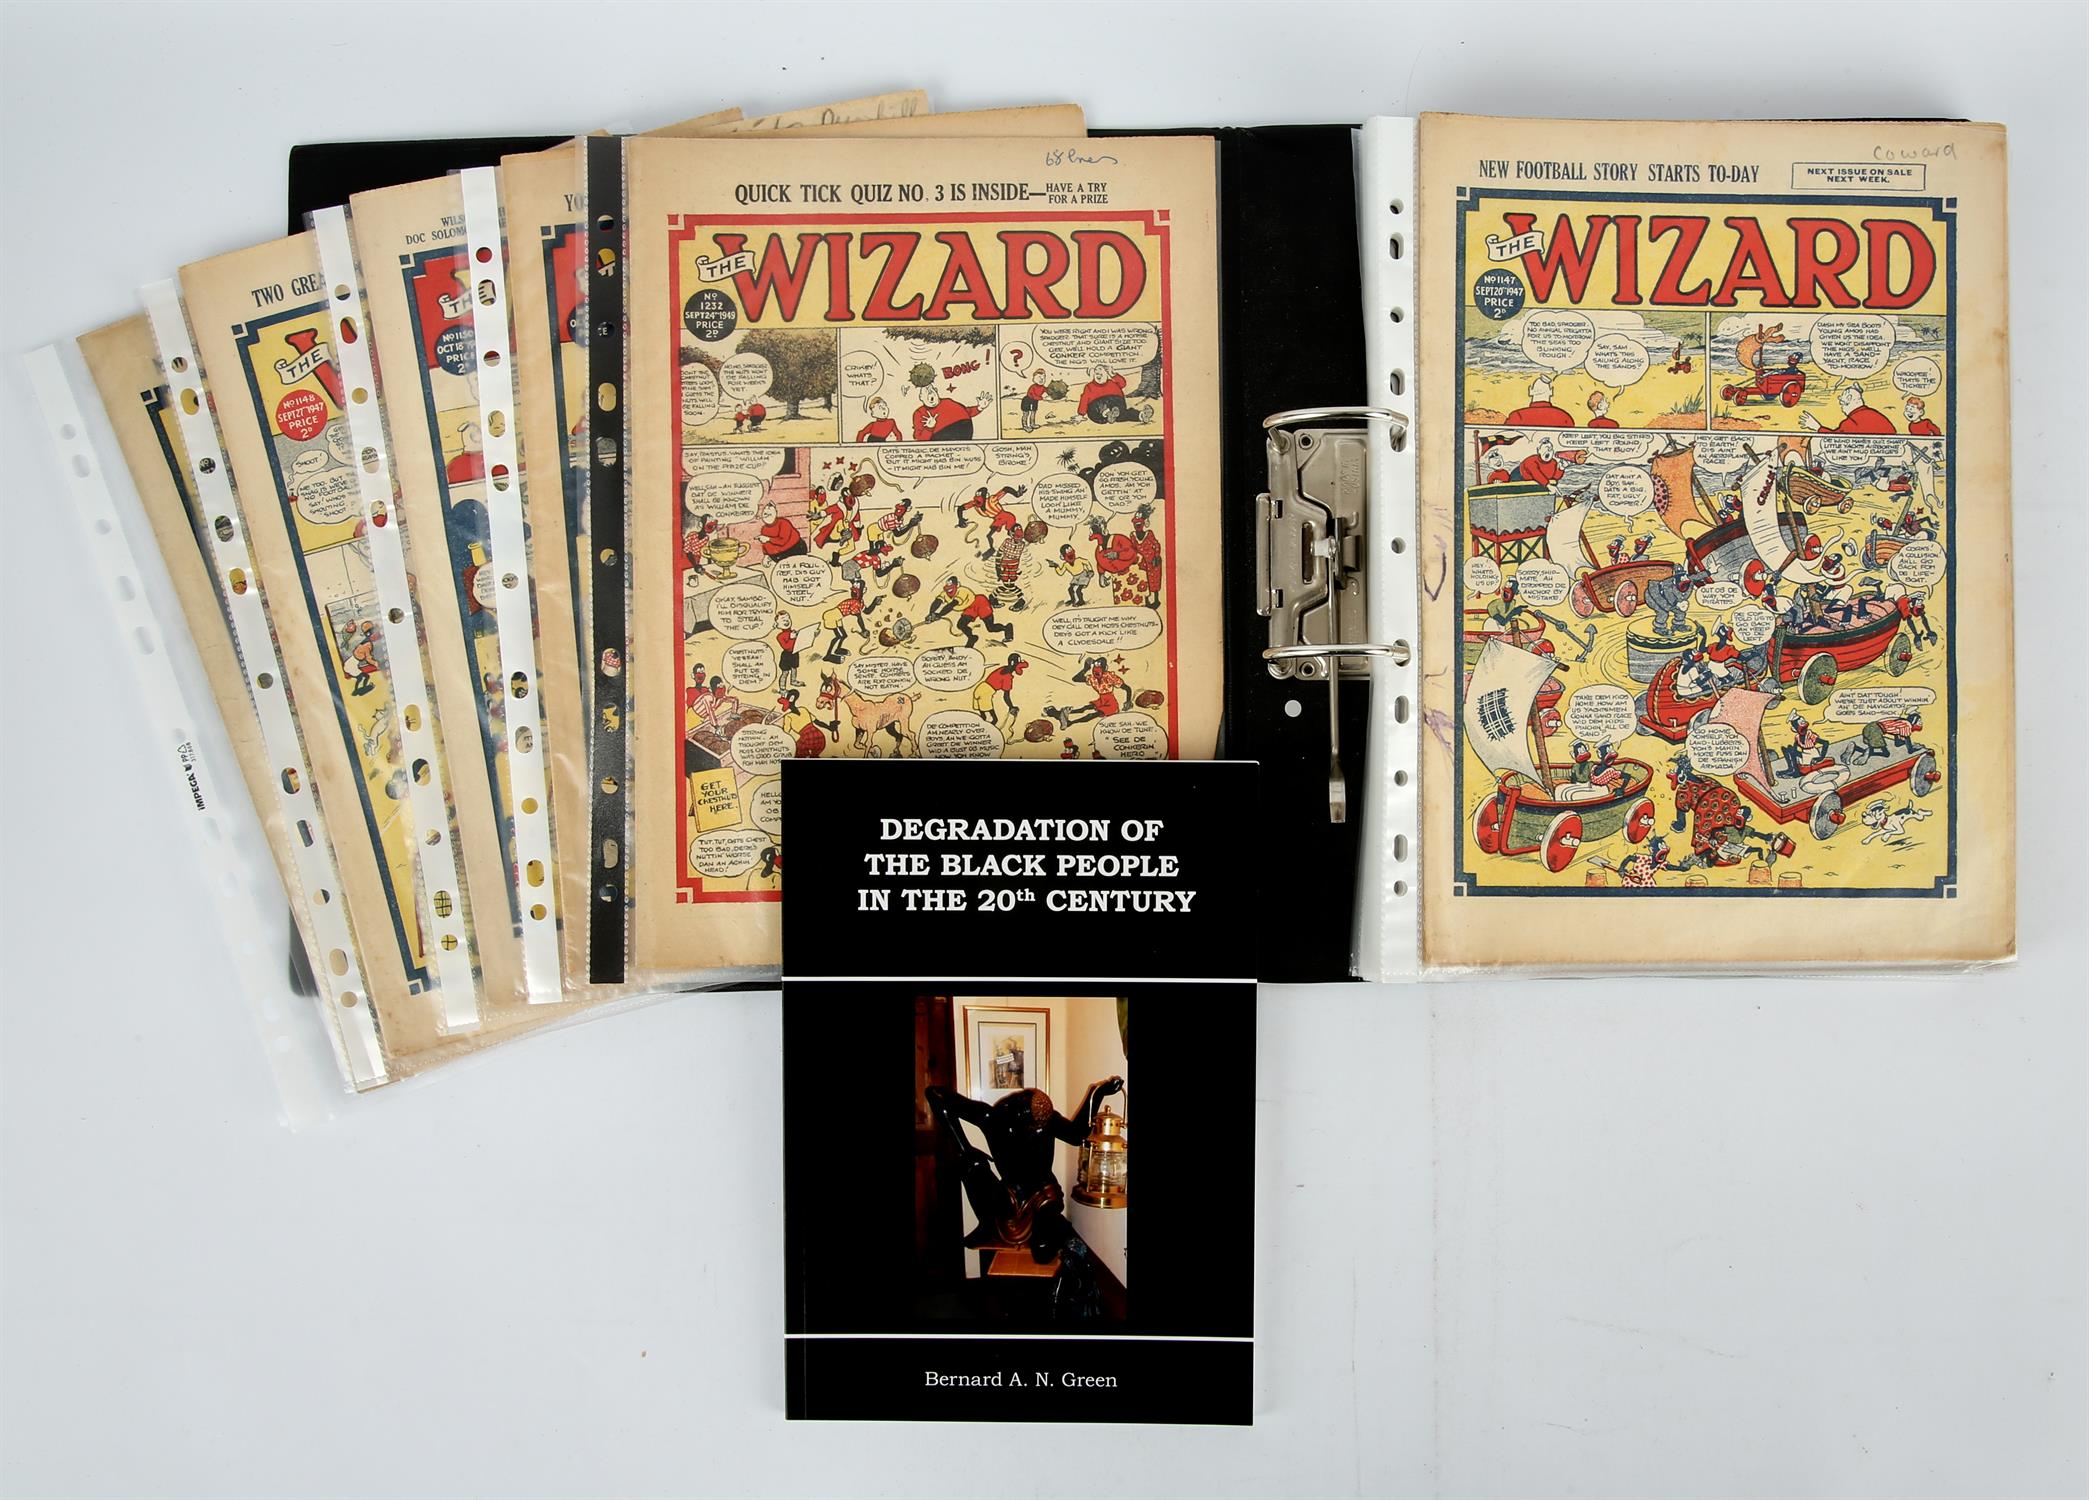 The Wizard Comics: A group of 30 (approx.) comics featuring now-notorious issues featuring Sam and